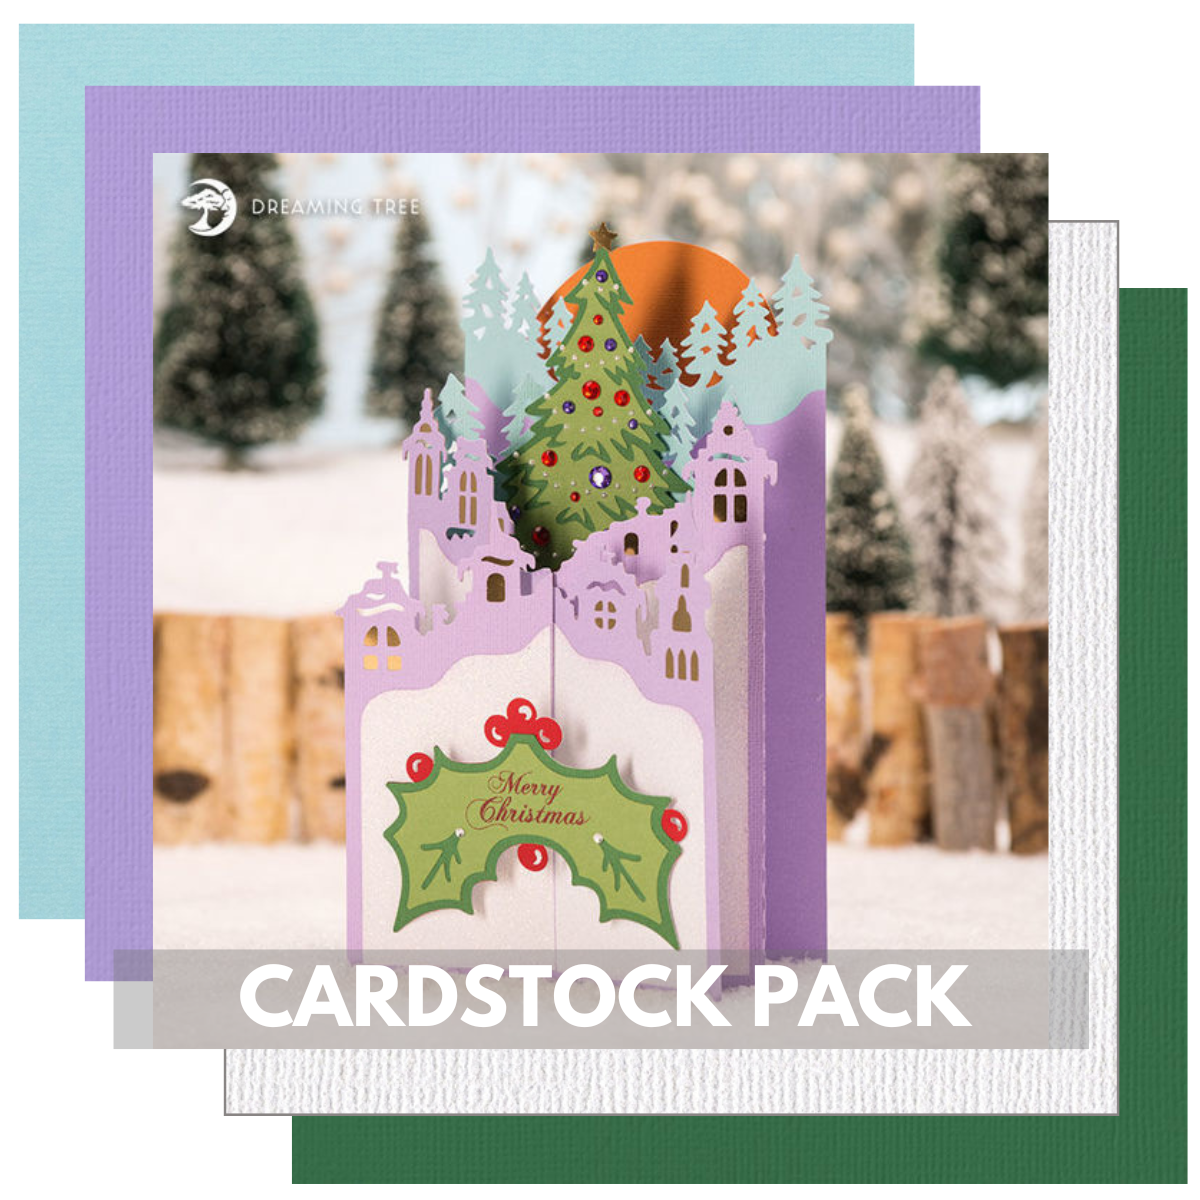 handmade Christmas card kit featuring files from Dreaming Tree